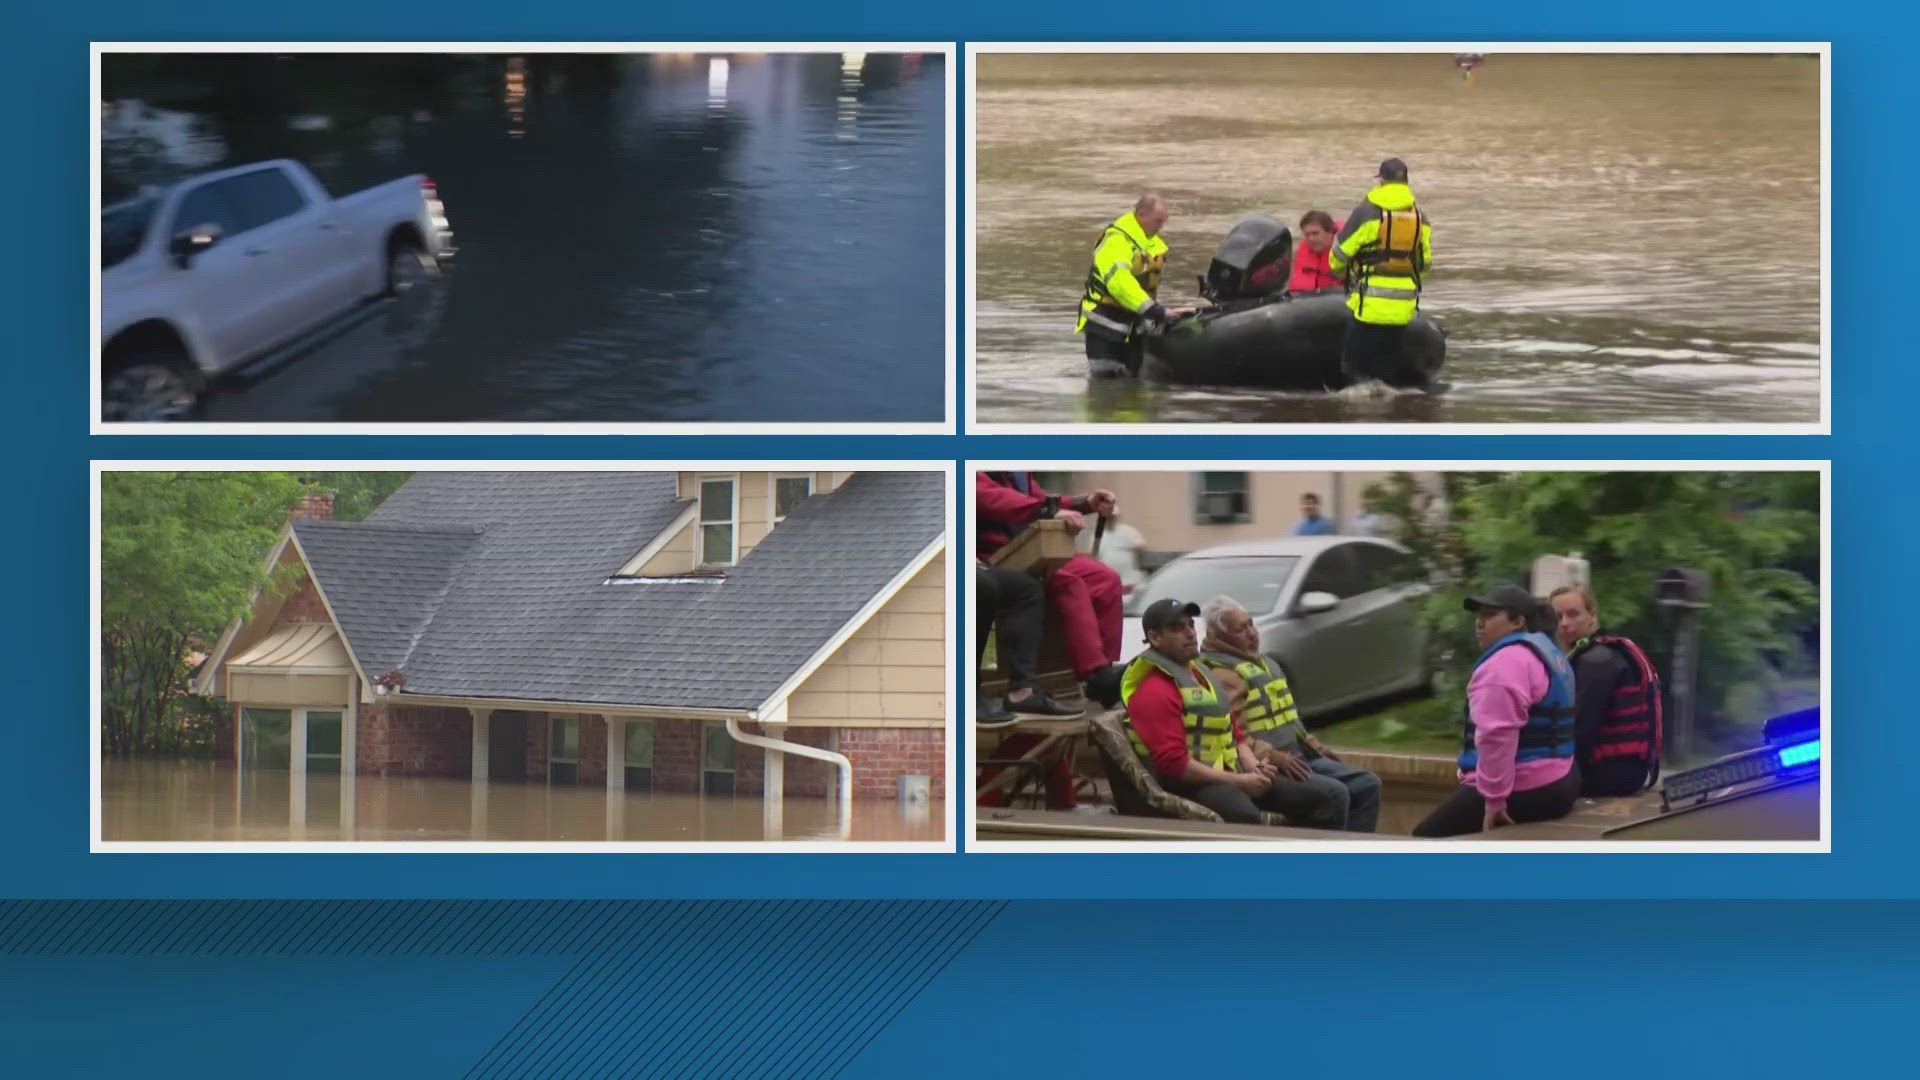 Dangerous flooding has already forced several rescues, including some from the roofs of flooded homes.